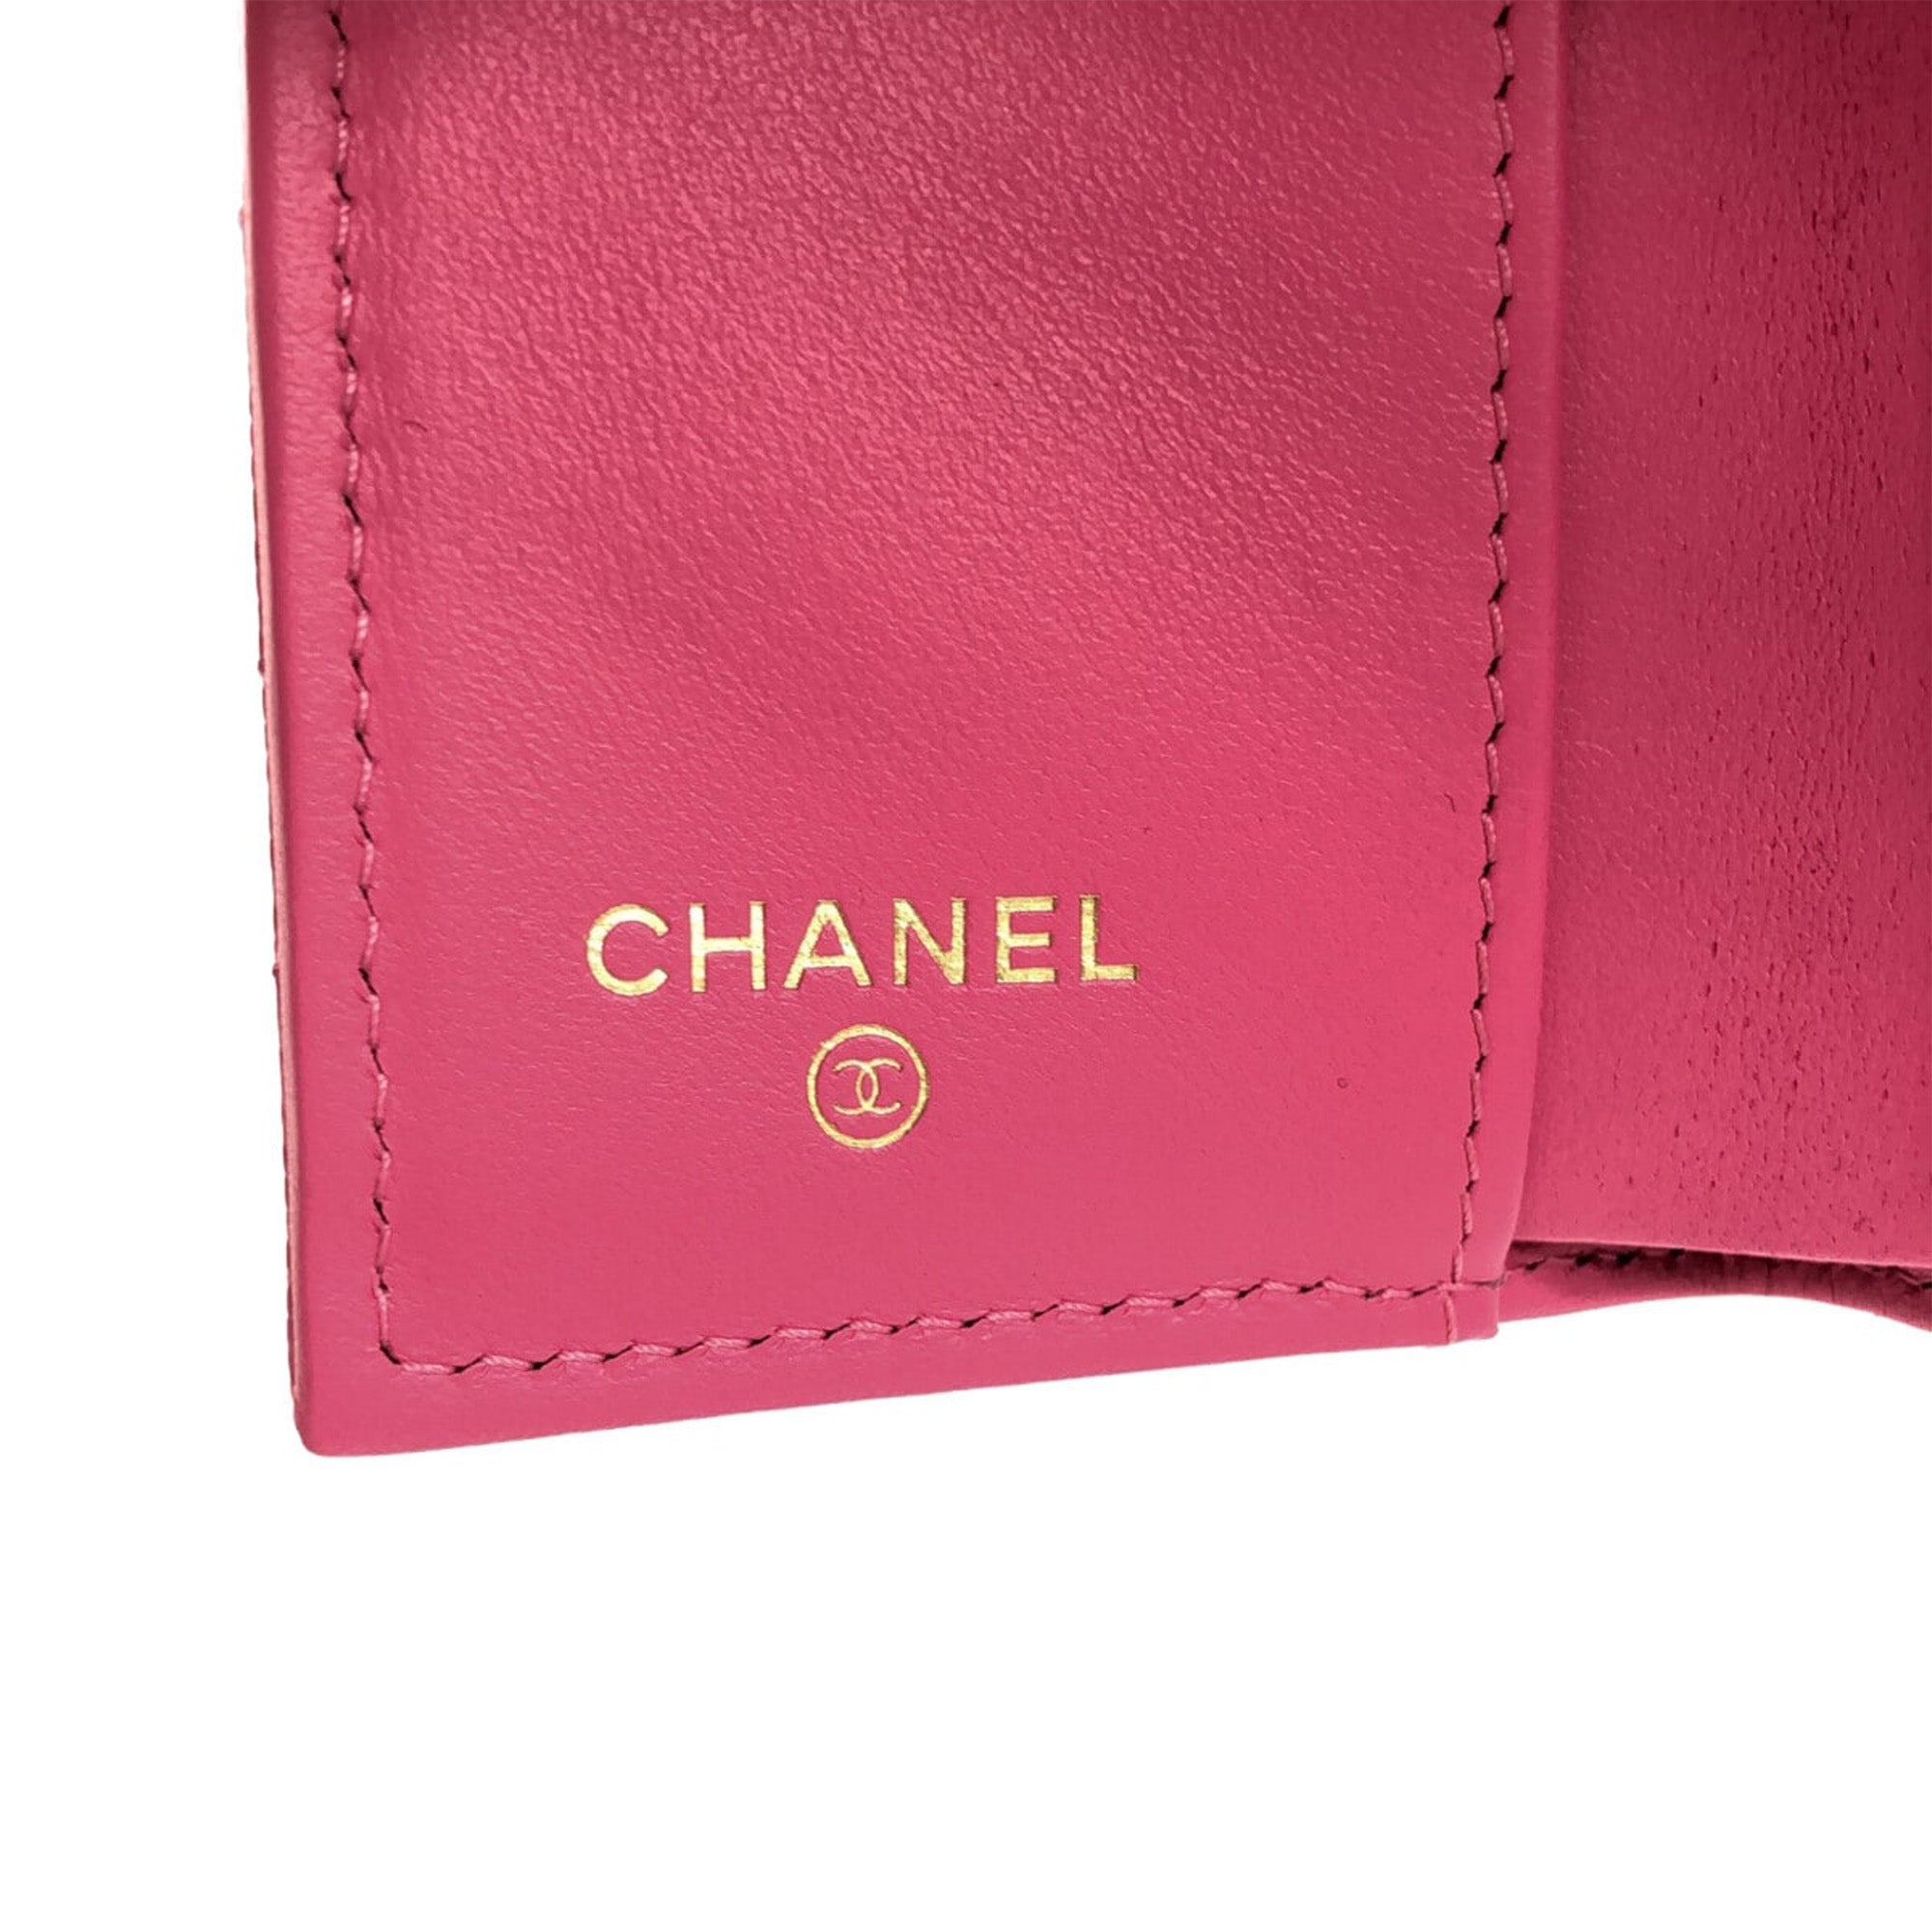 Pink Chanel CC Caviar Leather Wallet, 127-0Shops Revival